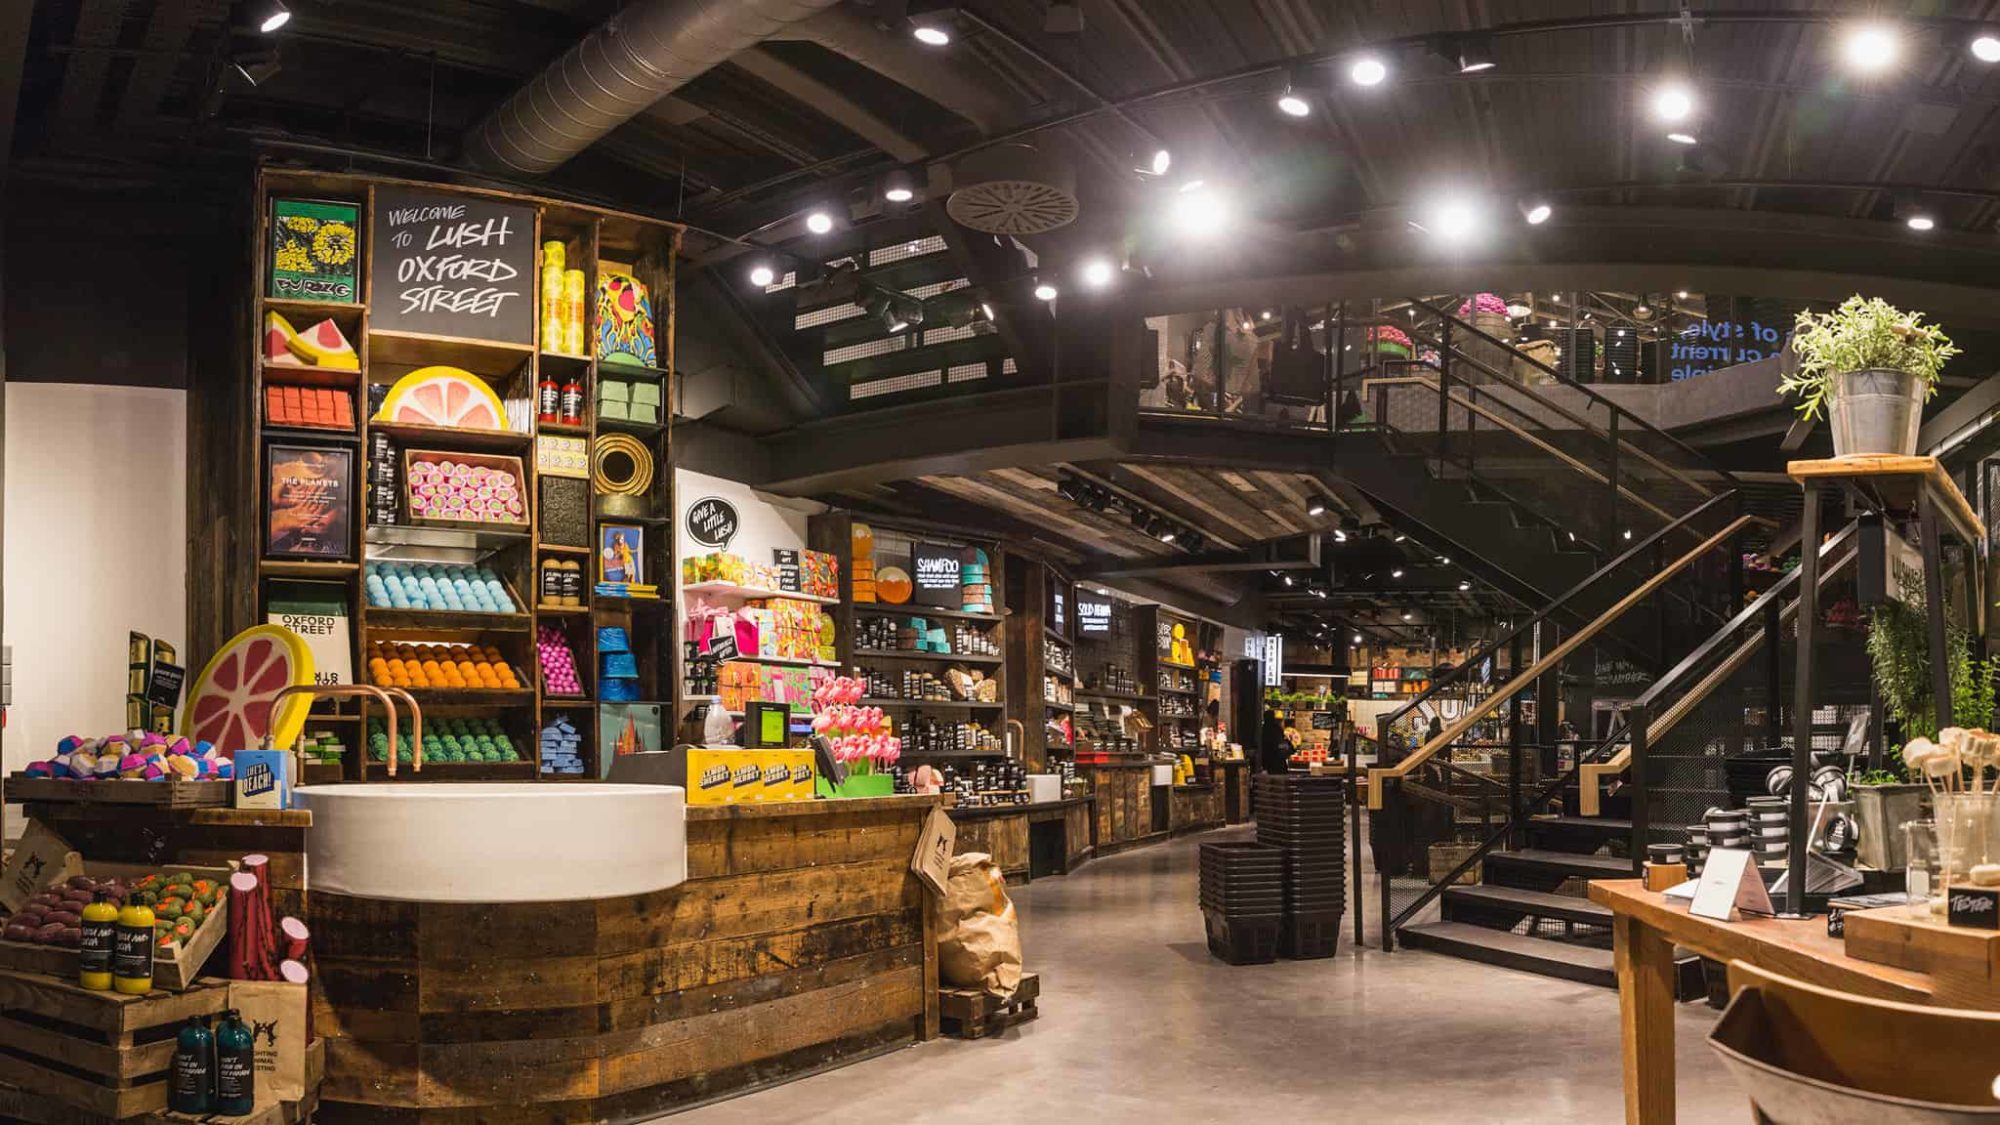 Silverwood buys Lush stake & acquires Sonotas